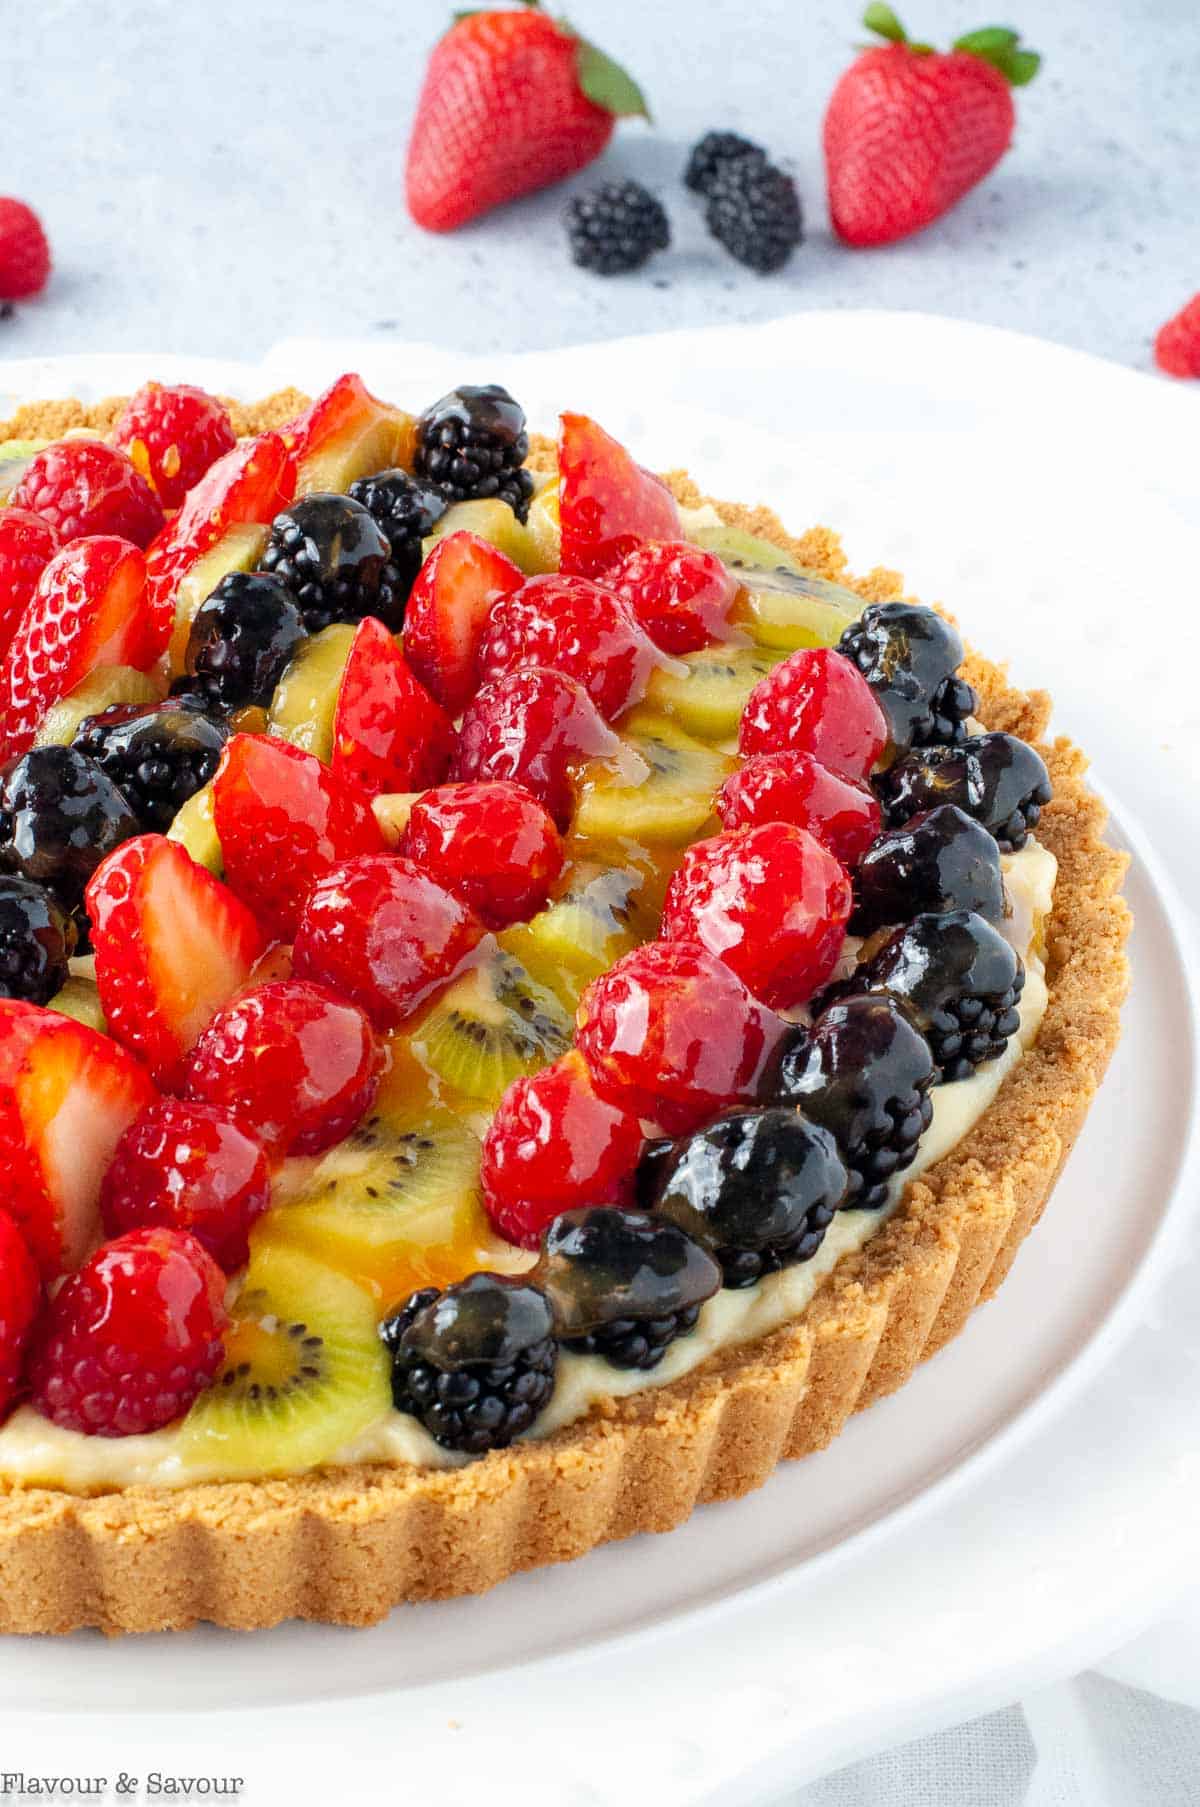 Fruit tart with pastry cream and graham cracker crust and berries topped with an apricot jam glaze.